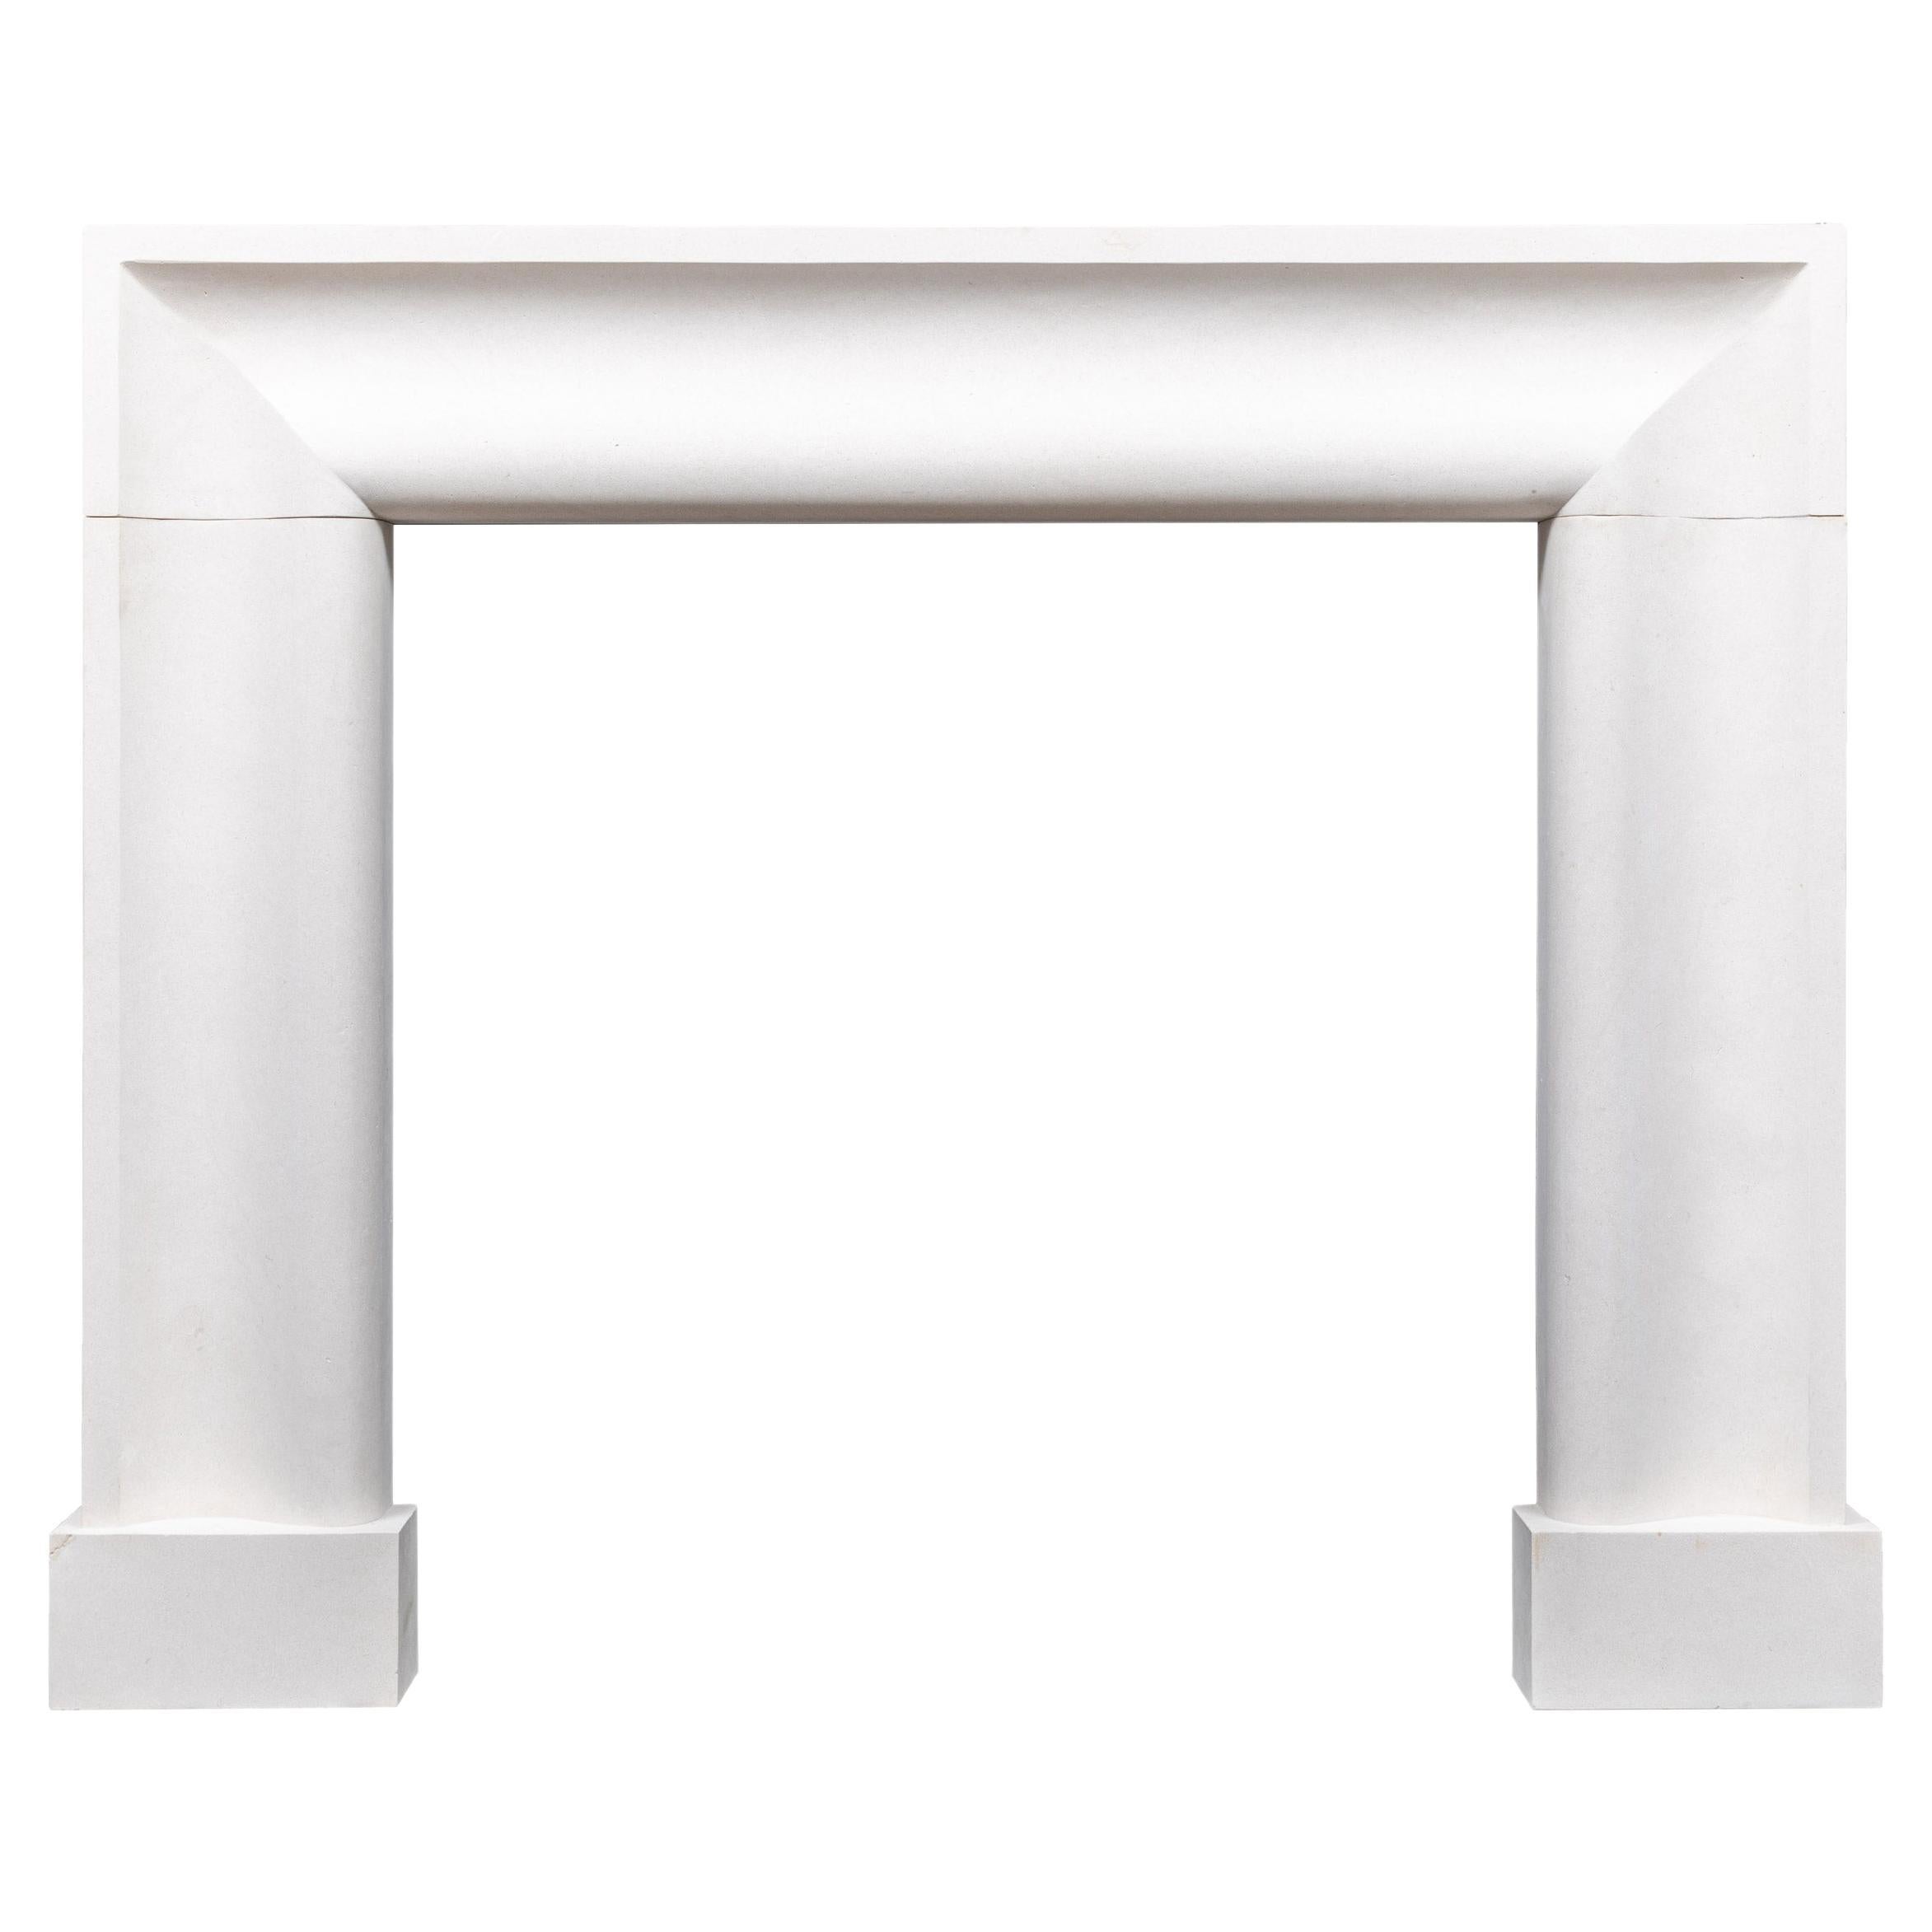 Ryan and Smith Modern Stone Bolection Style Fireplace For Sale